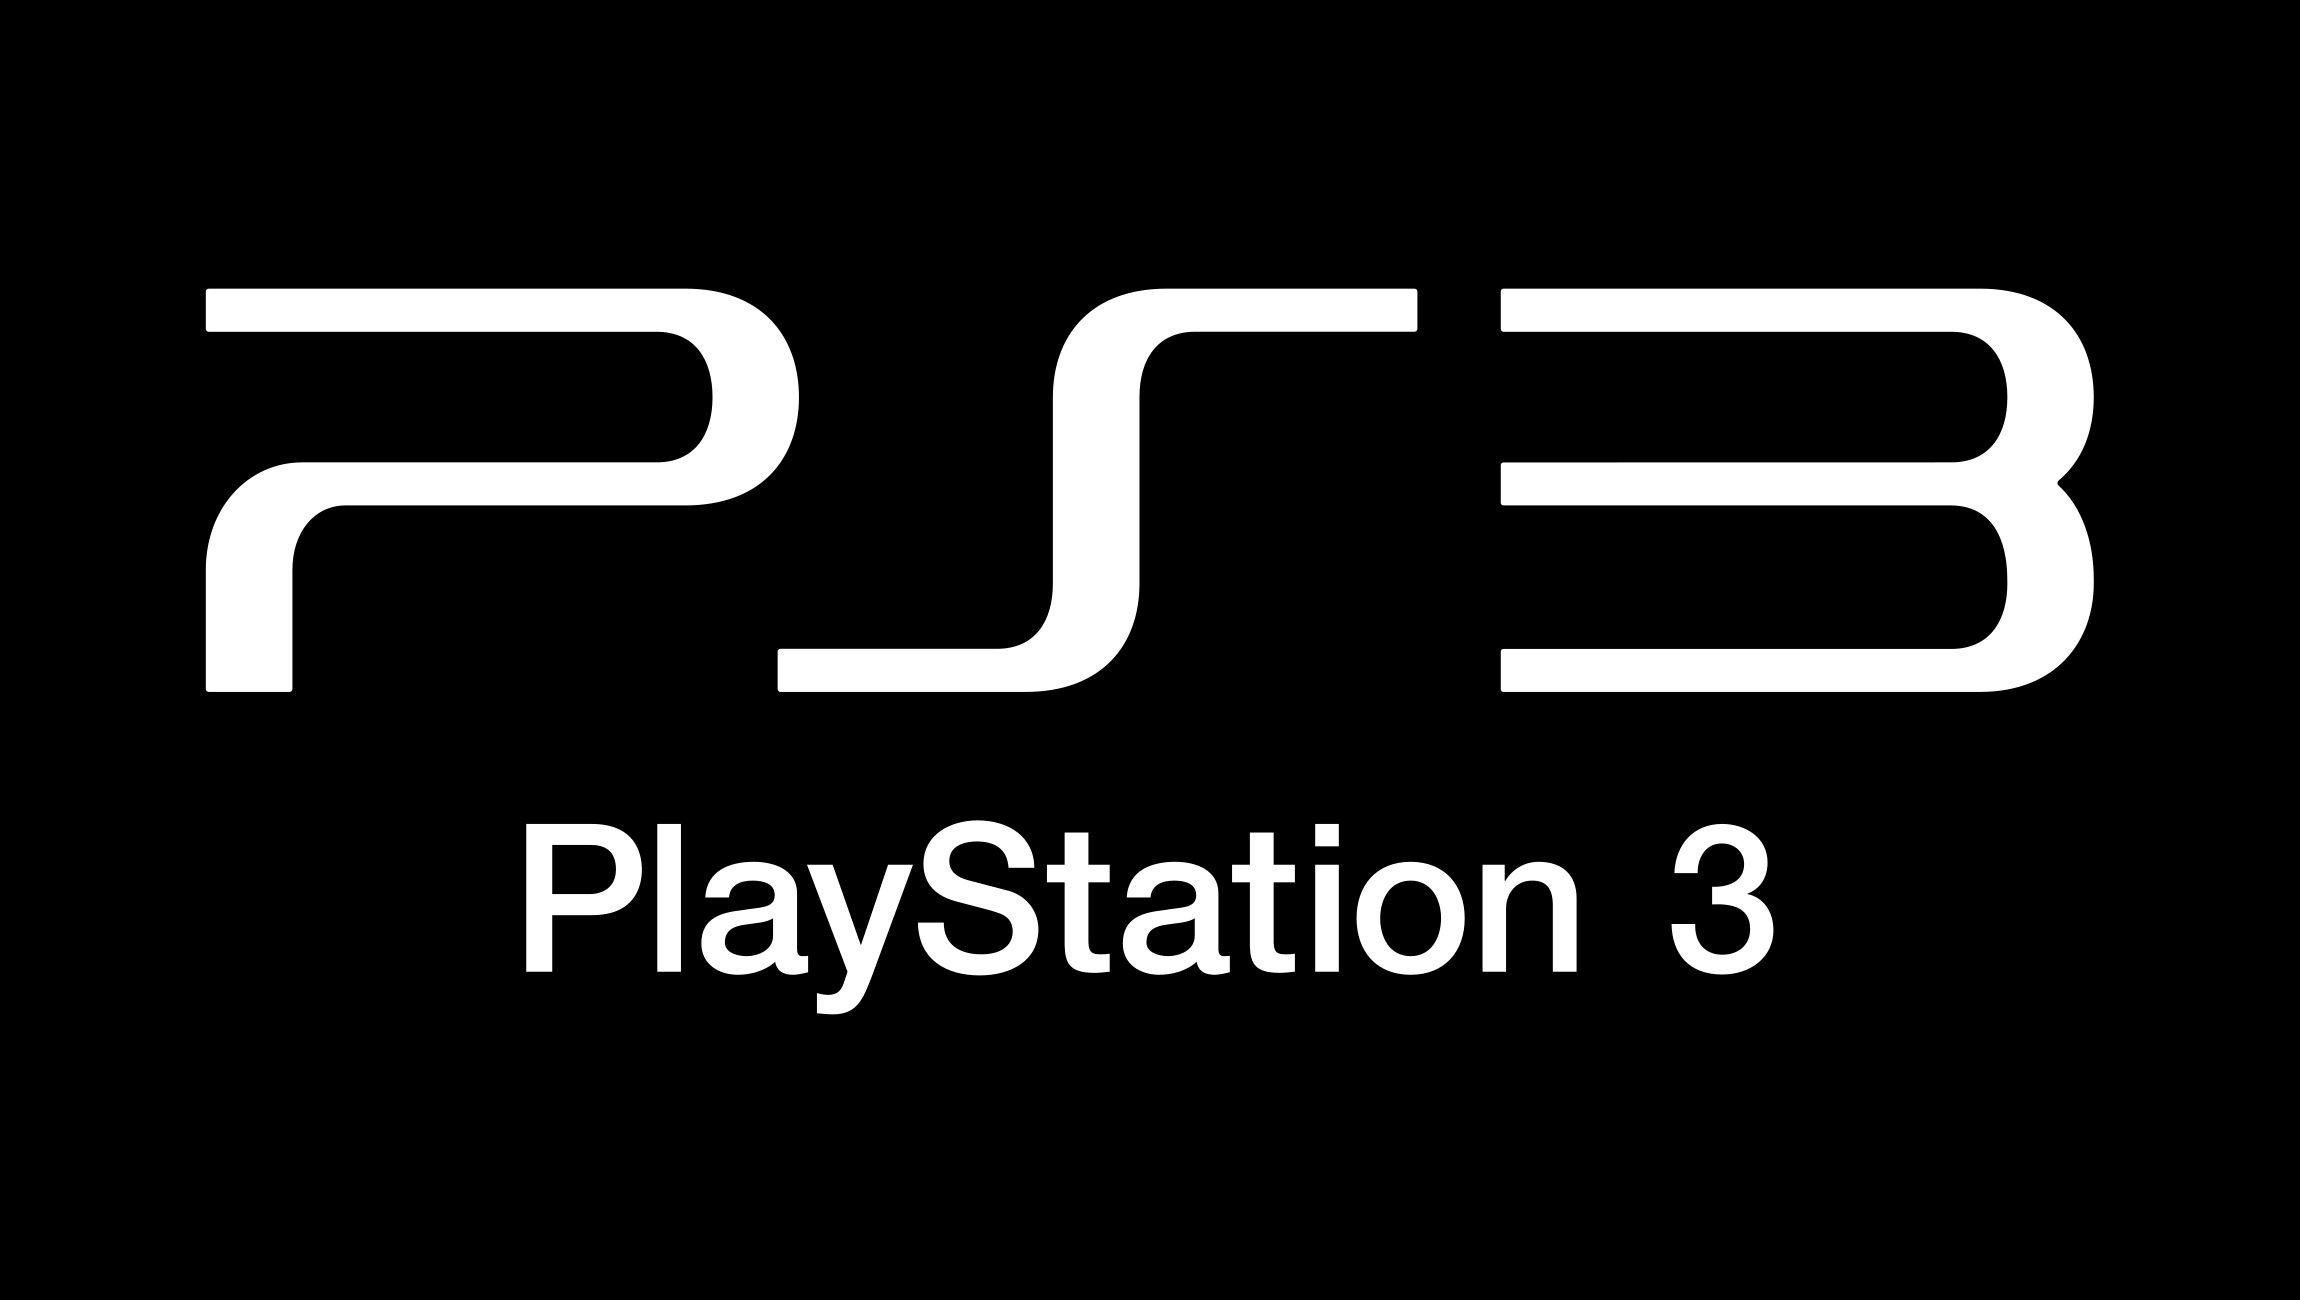 Red S and P Logo - PlayStation Logo, PlayStation Symbol, History and Evolution